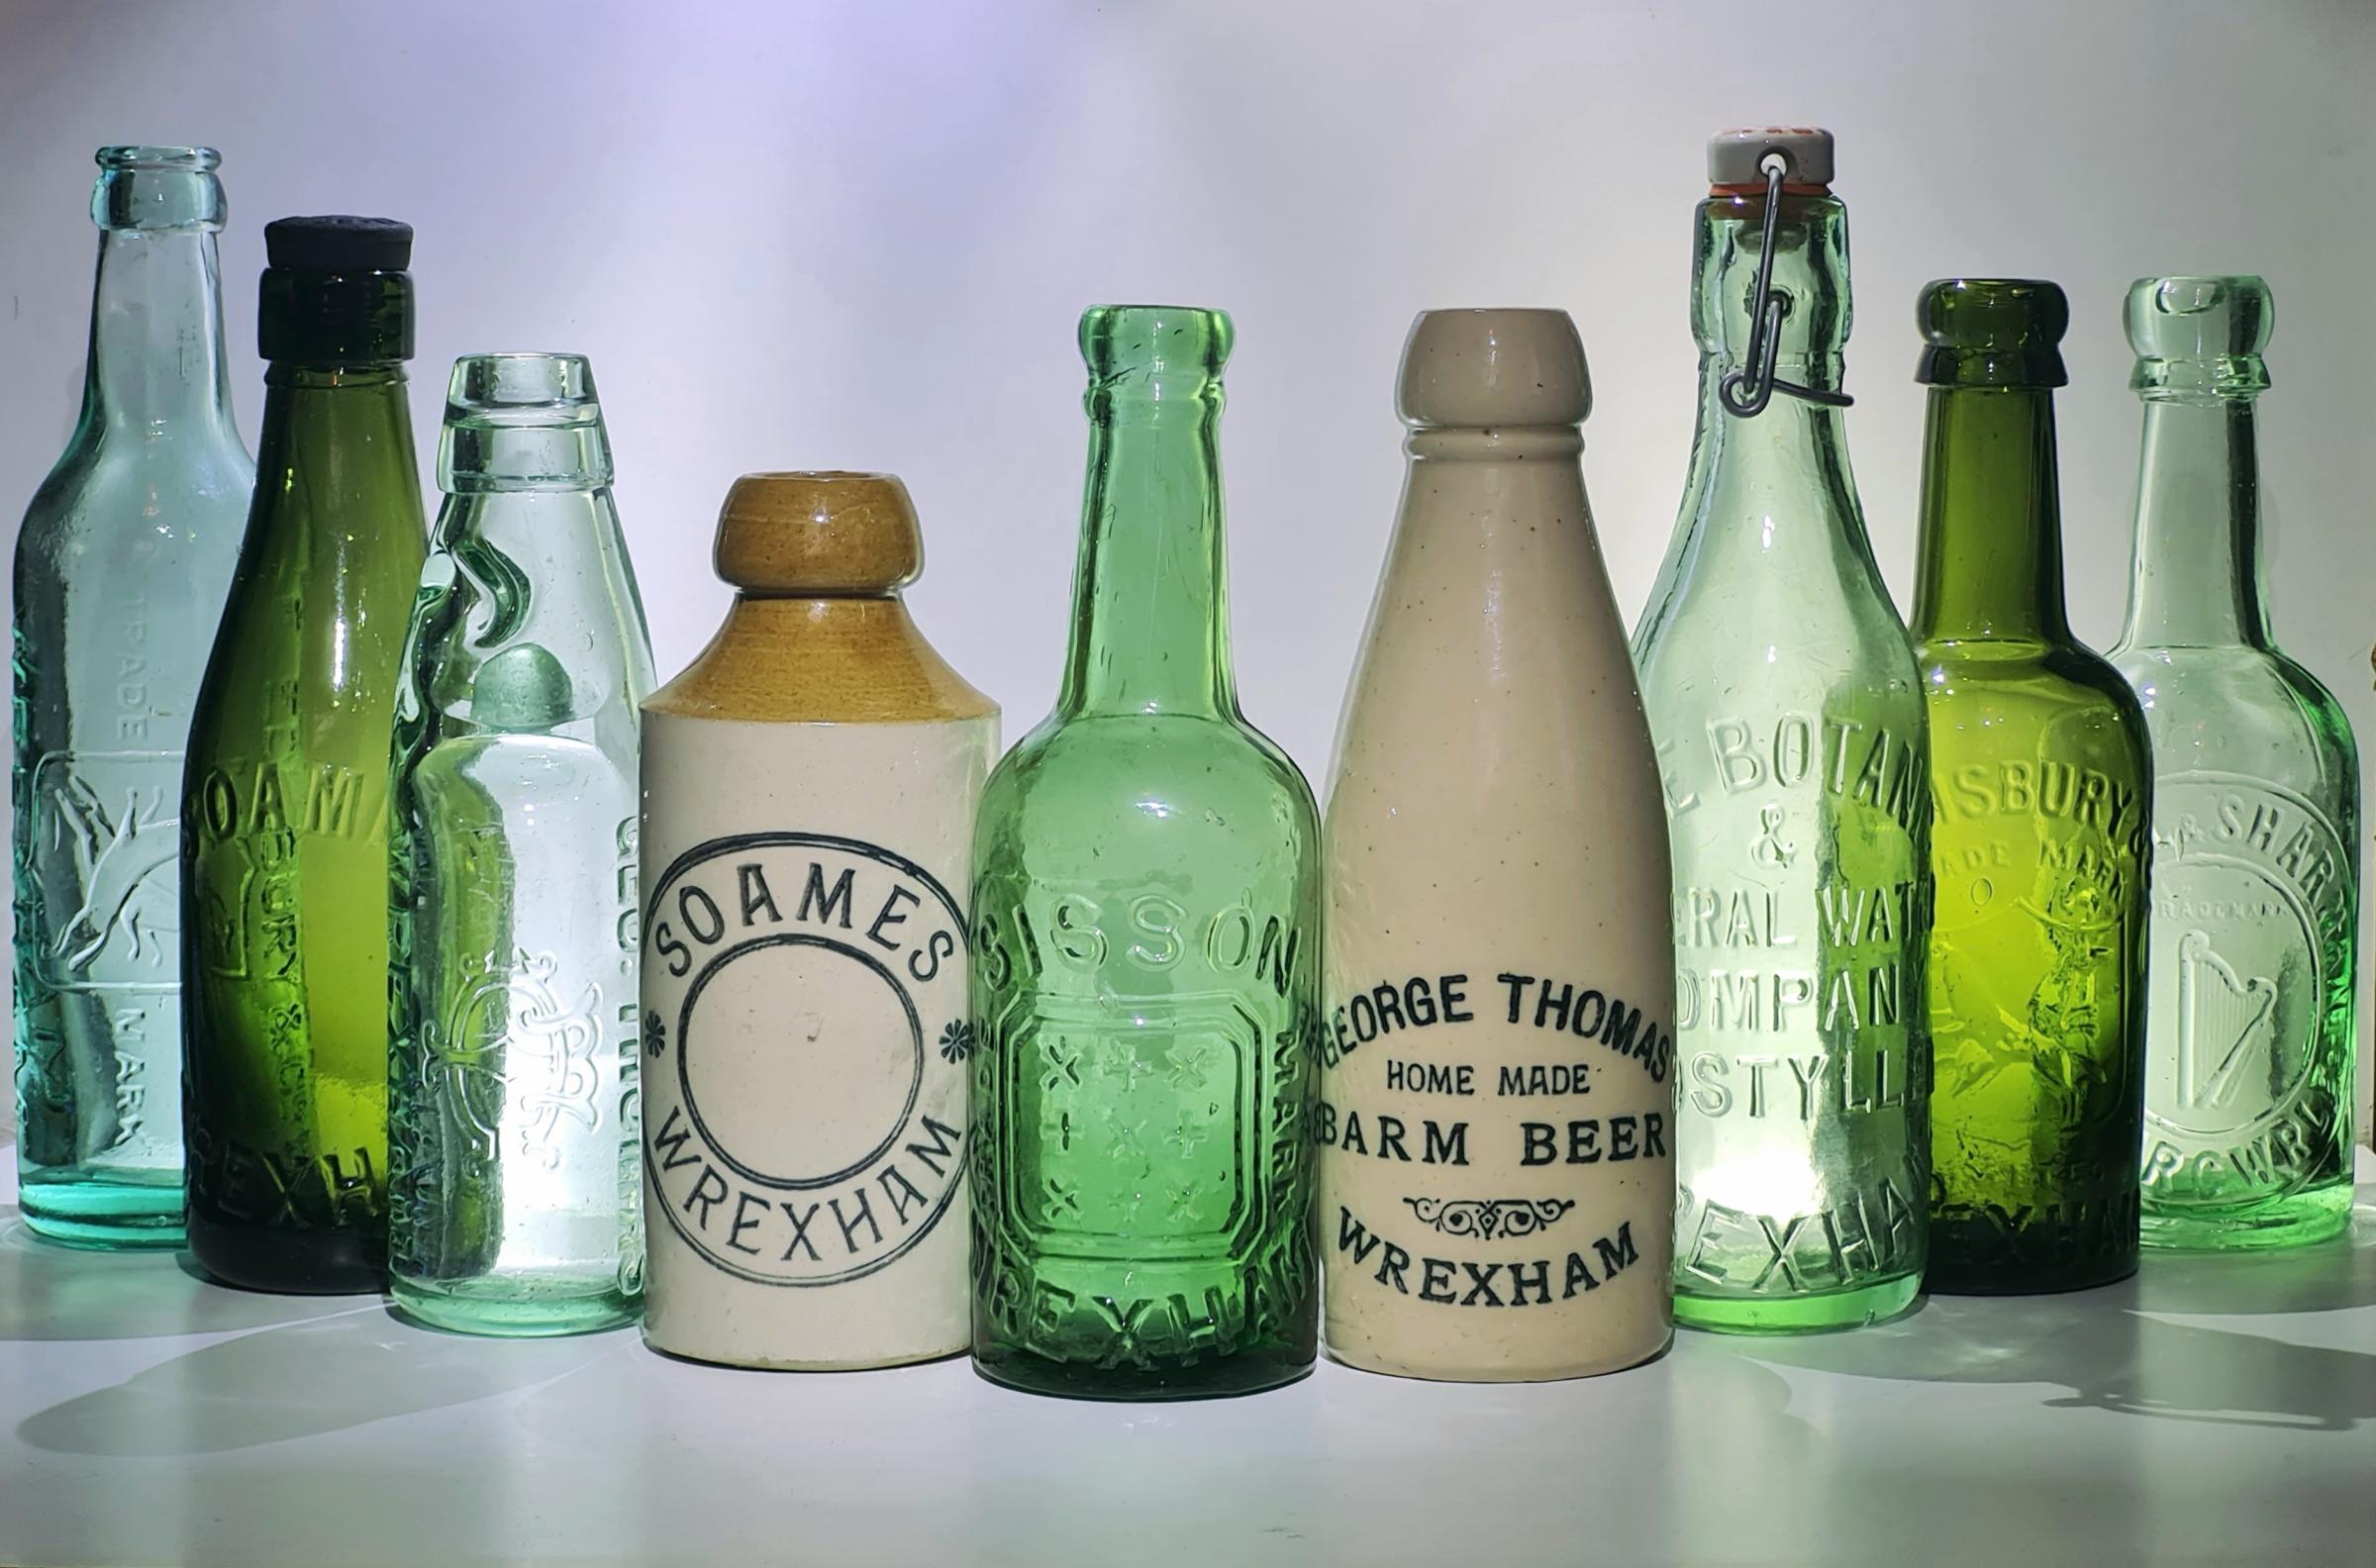 Local finds by Adam Mercer, including one of his favourites, a Soames stone ginger beer bottle.